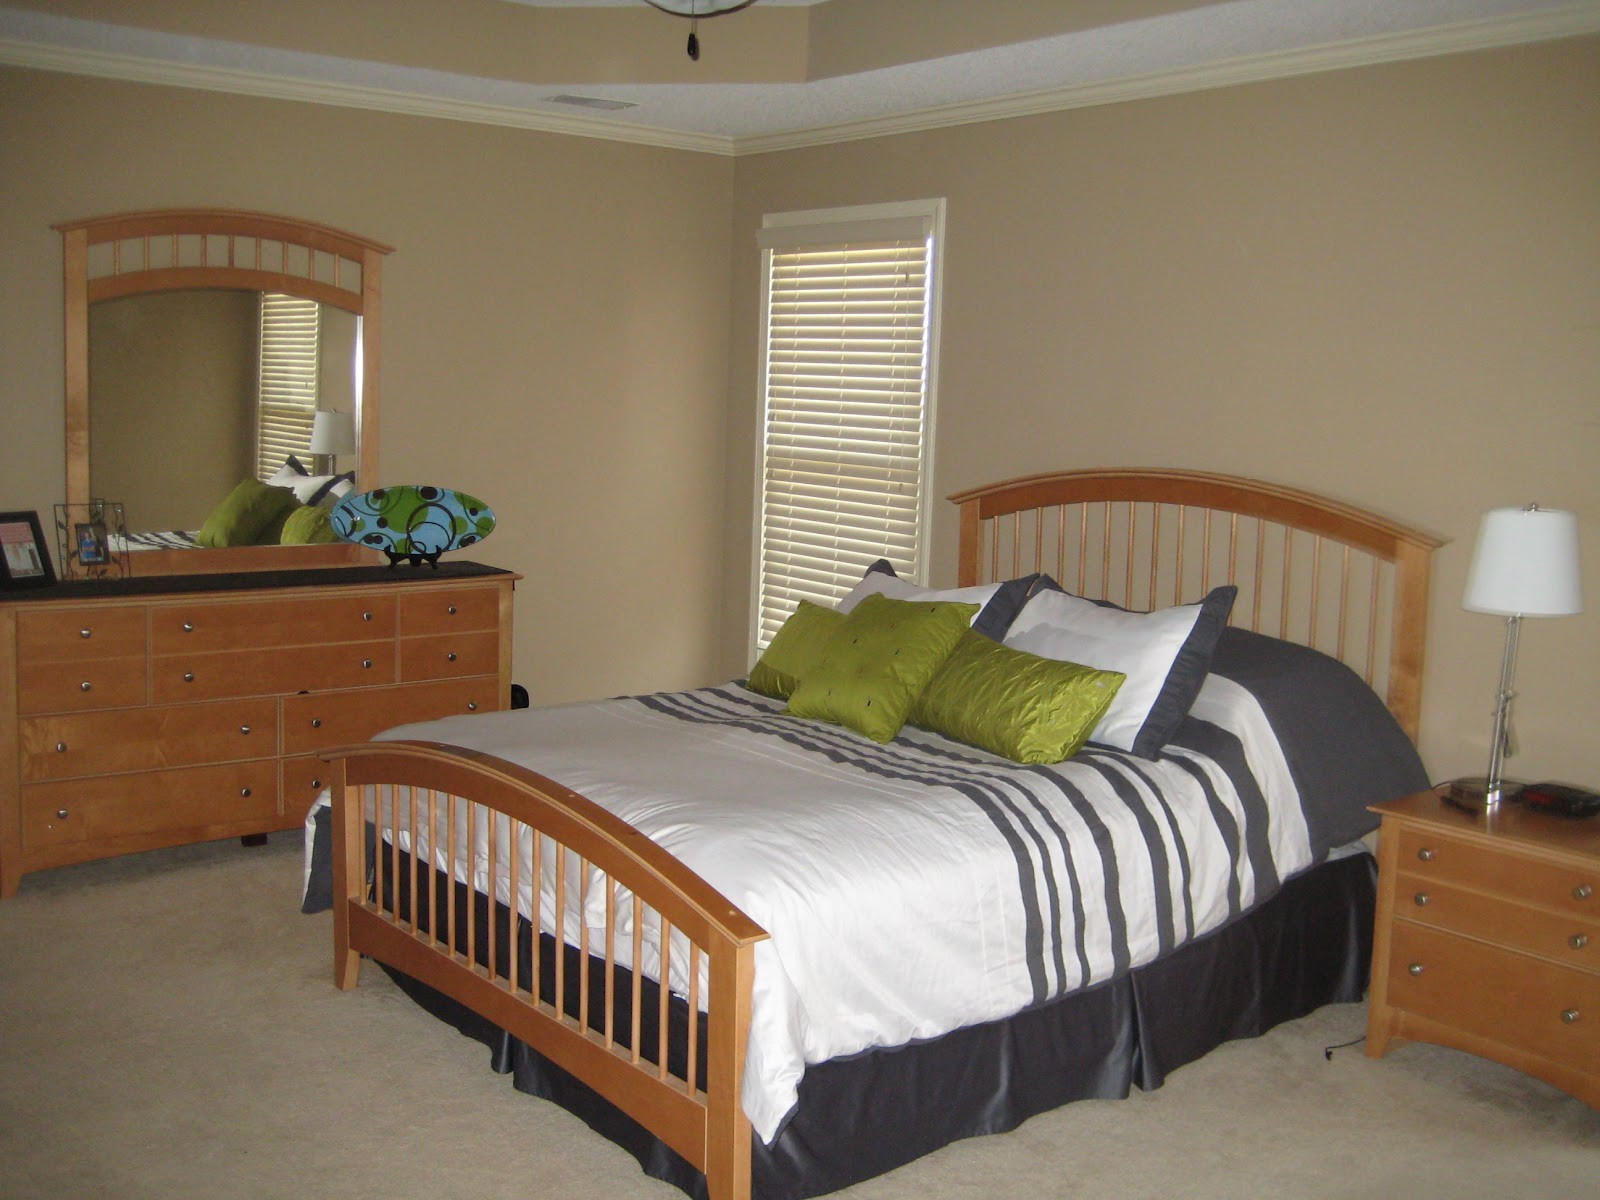 Small Bedroom Furniture Arrangement
 Painted Dreams of Life Family & Home Master Bedroom